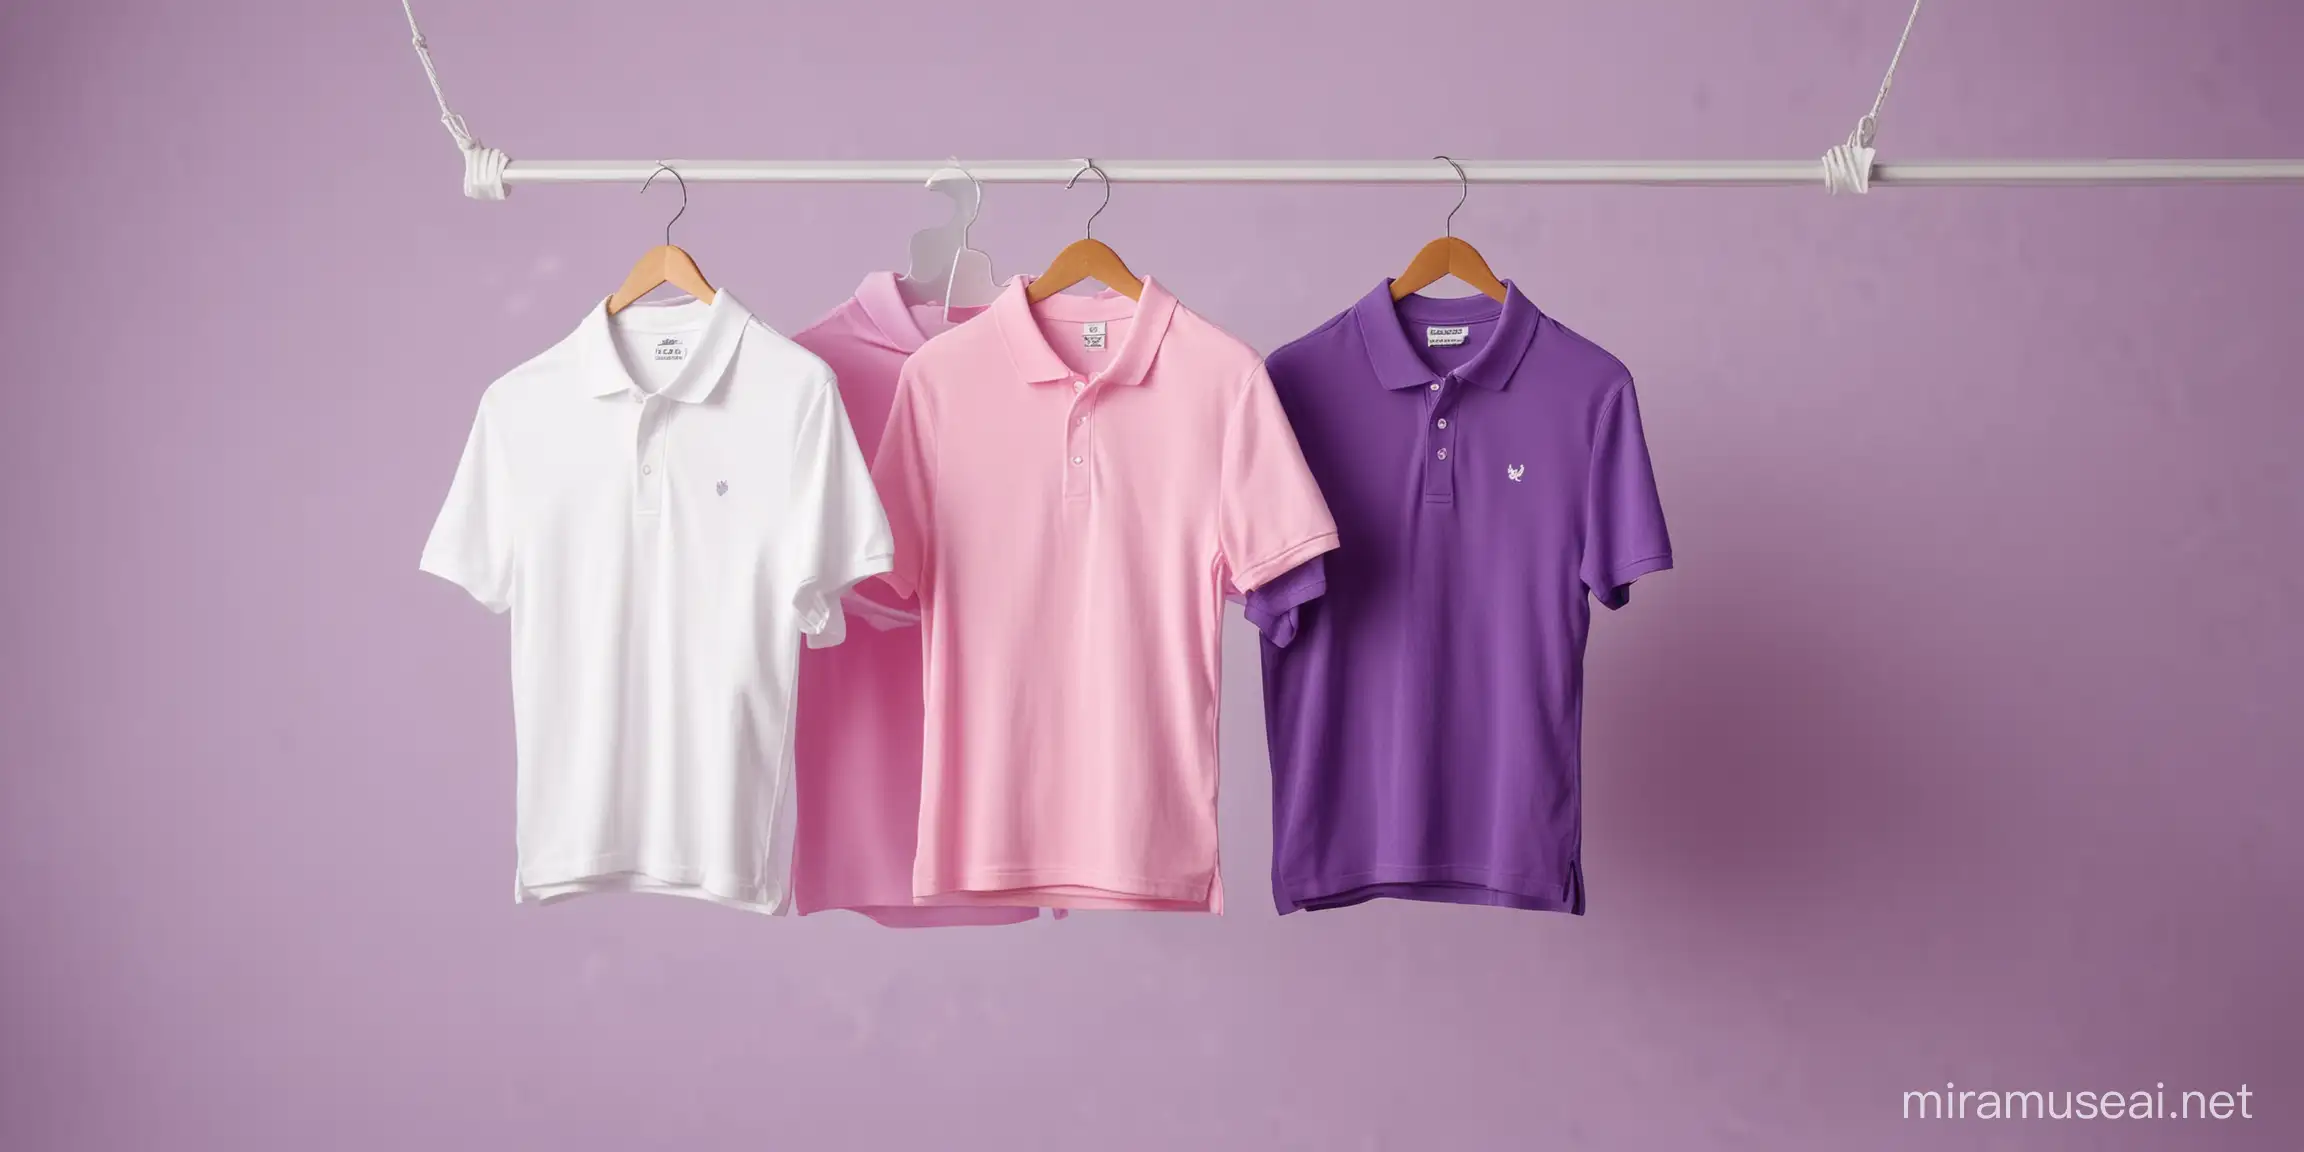 Good shaped, only 3 Polo T shirts hanging in a hanger, T Shirts color, first pink , second purple and third one is white , summer theme blurred background , with some leaf elements